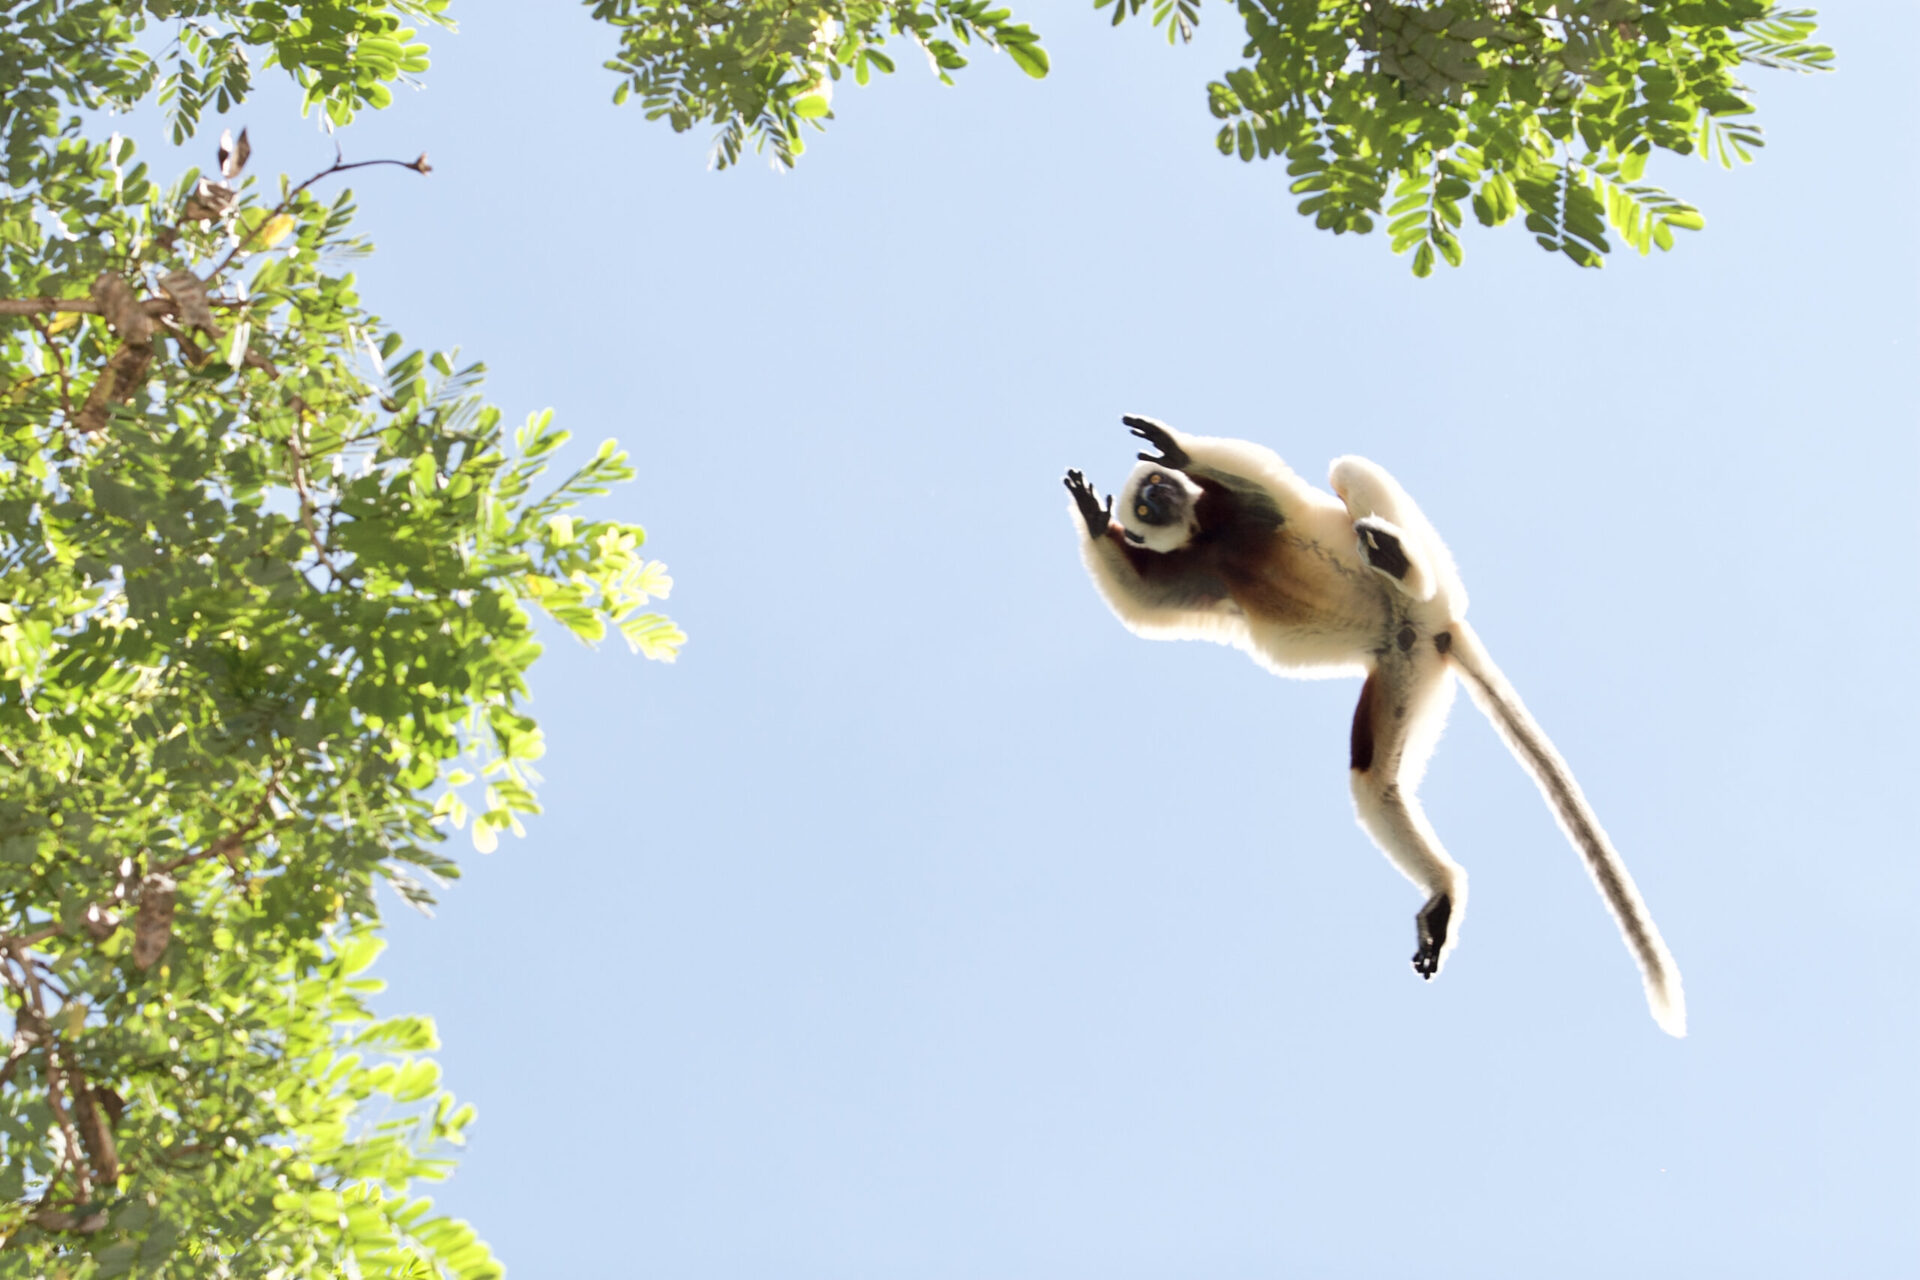 View of a sifaka in Madagascar leaping into a tree against blue sky